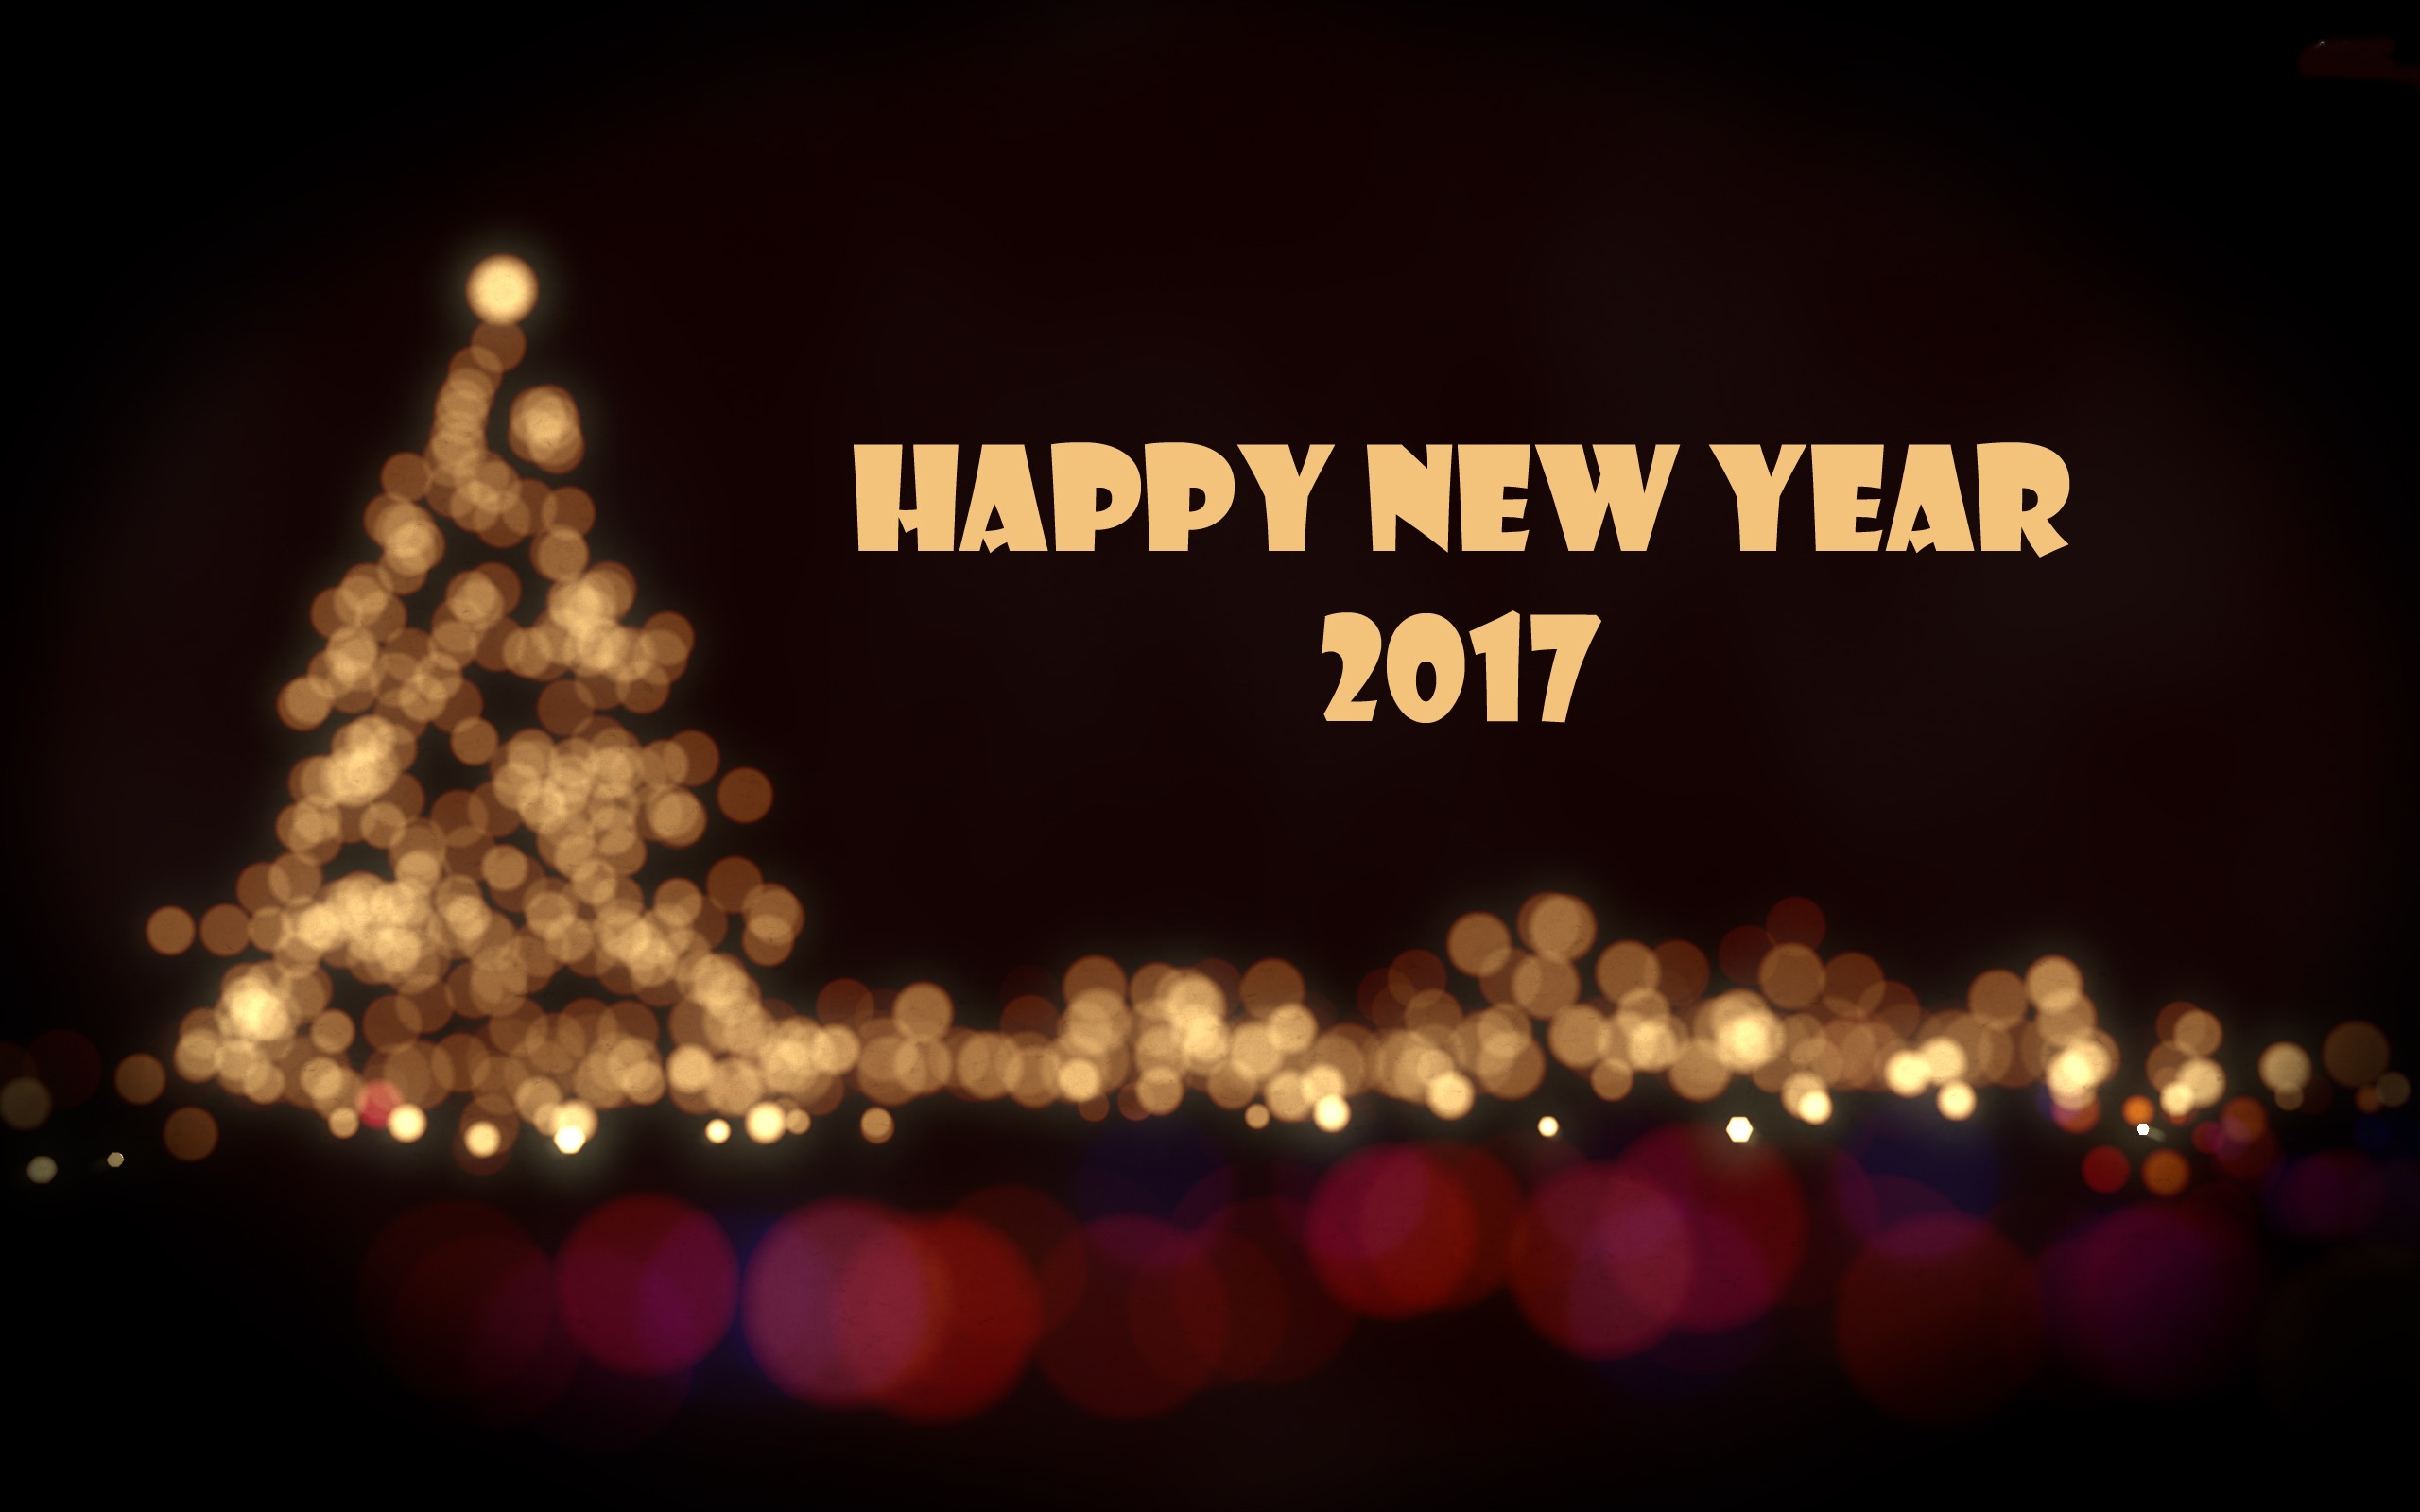 Happy New Year 2017 Wallpaper - Blurred Out Christmas Lights - HD Wallpaper 